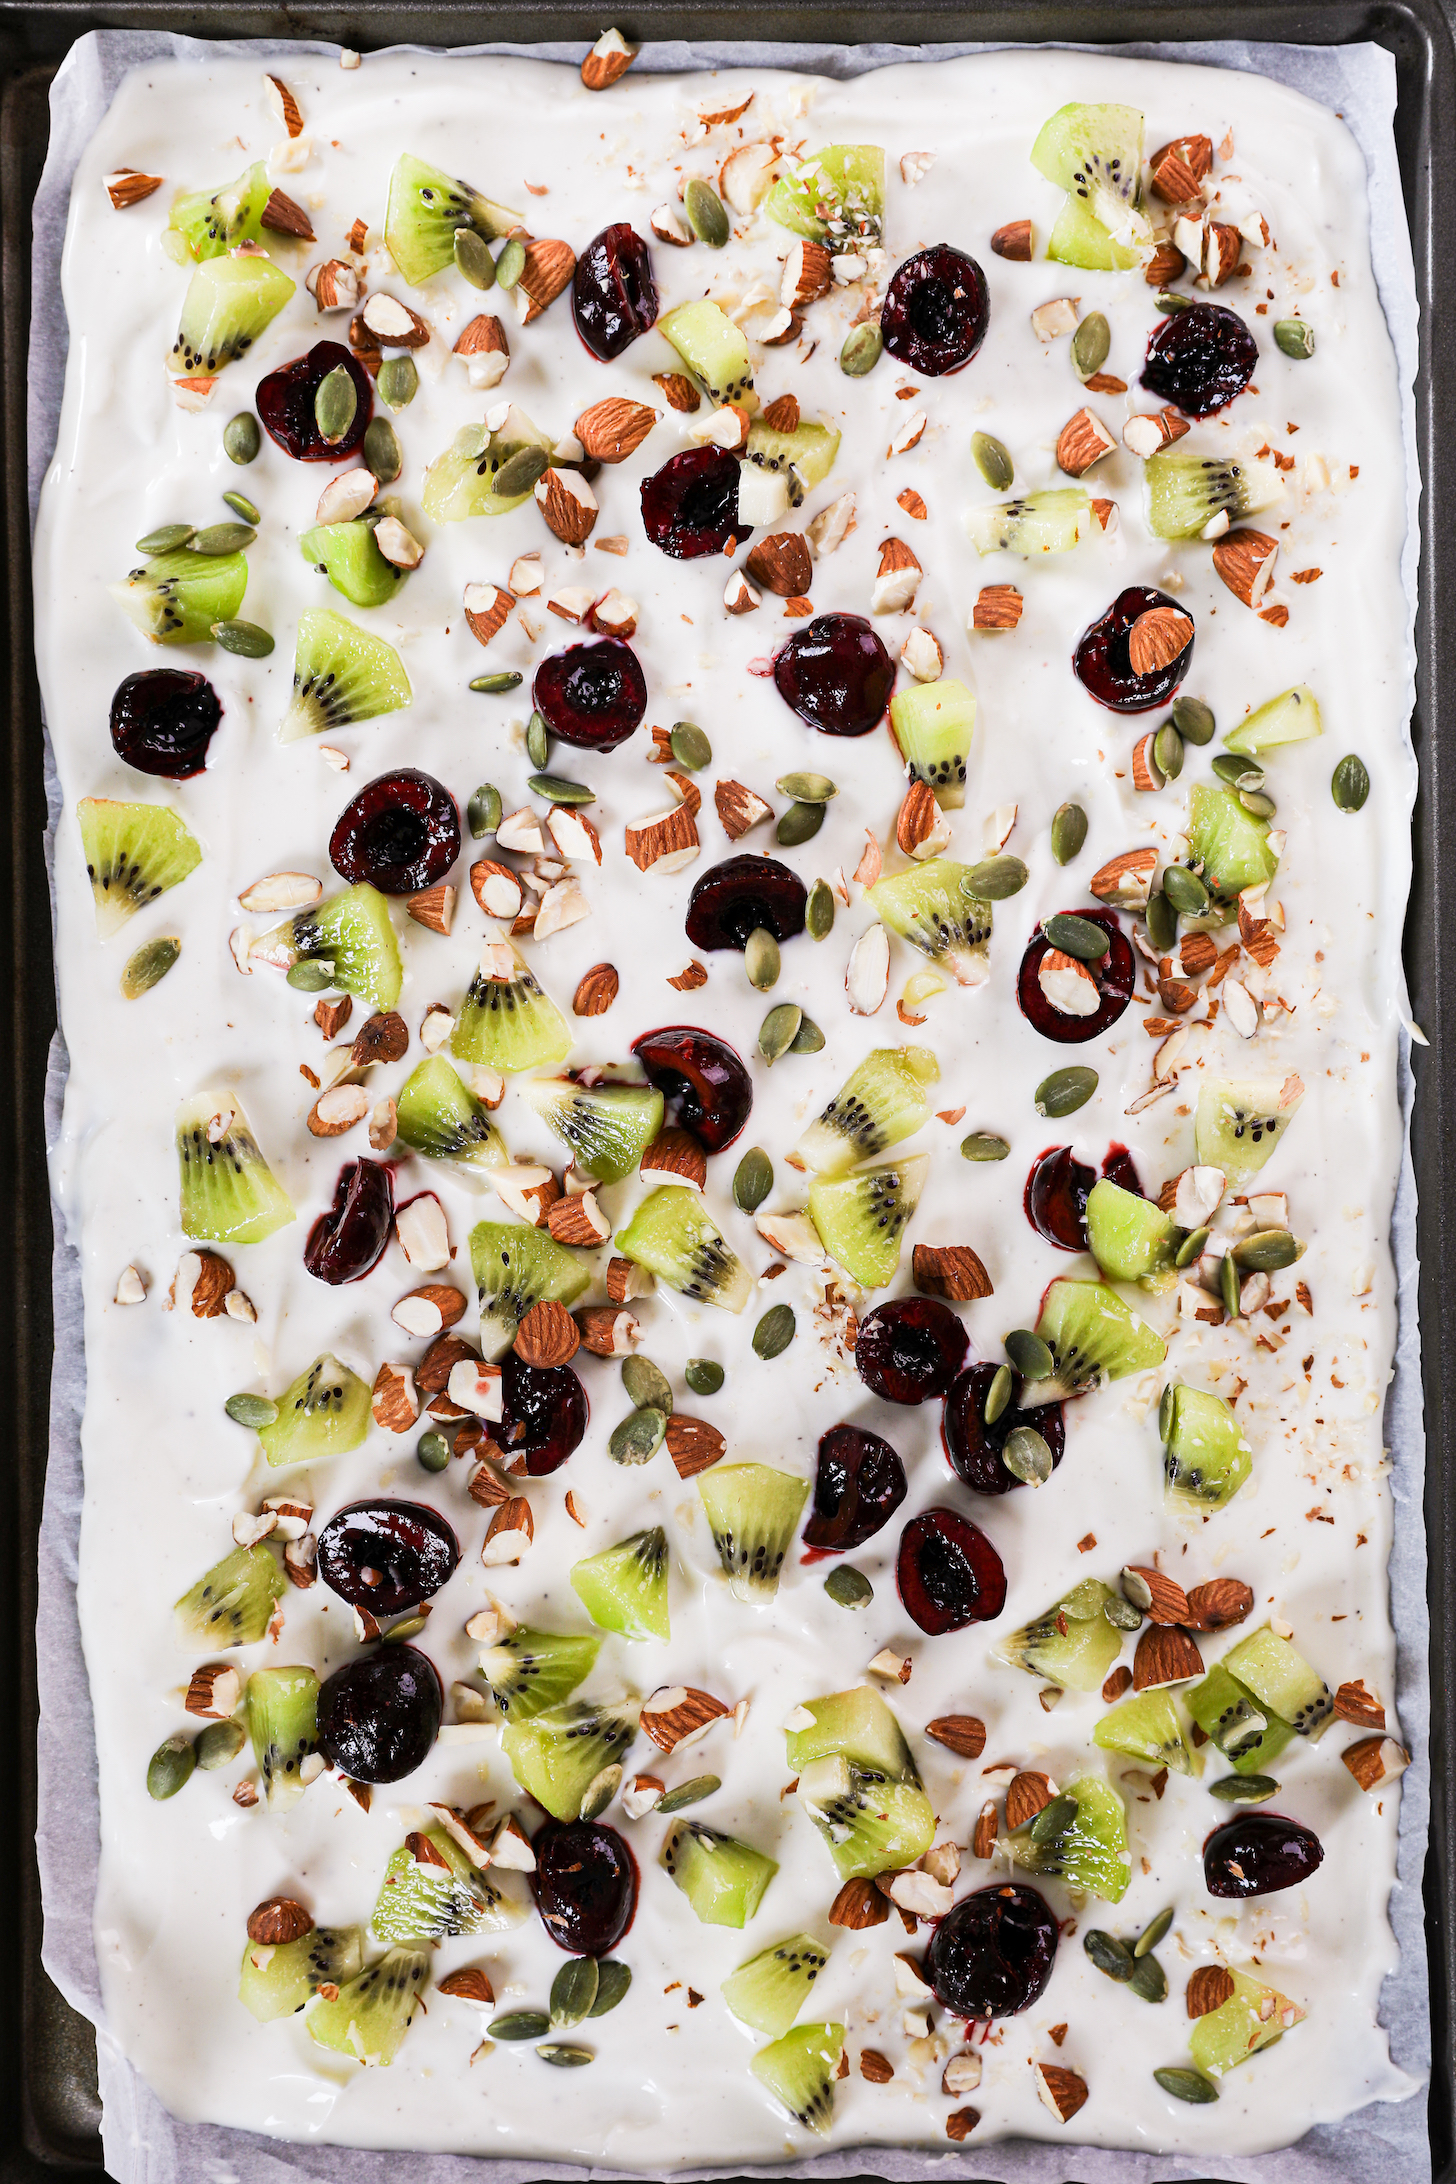 A smooth layer of yogurt garnished with a variety of diced fruits and nuts, showcased on a tray with raised edges and parchment paper lining.